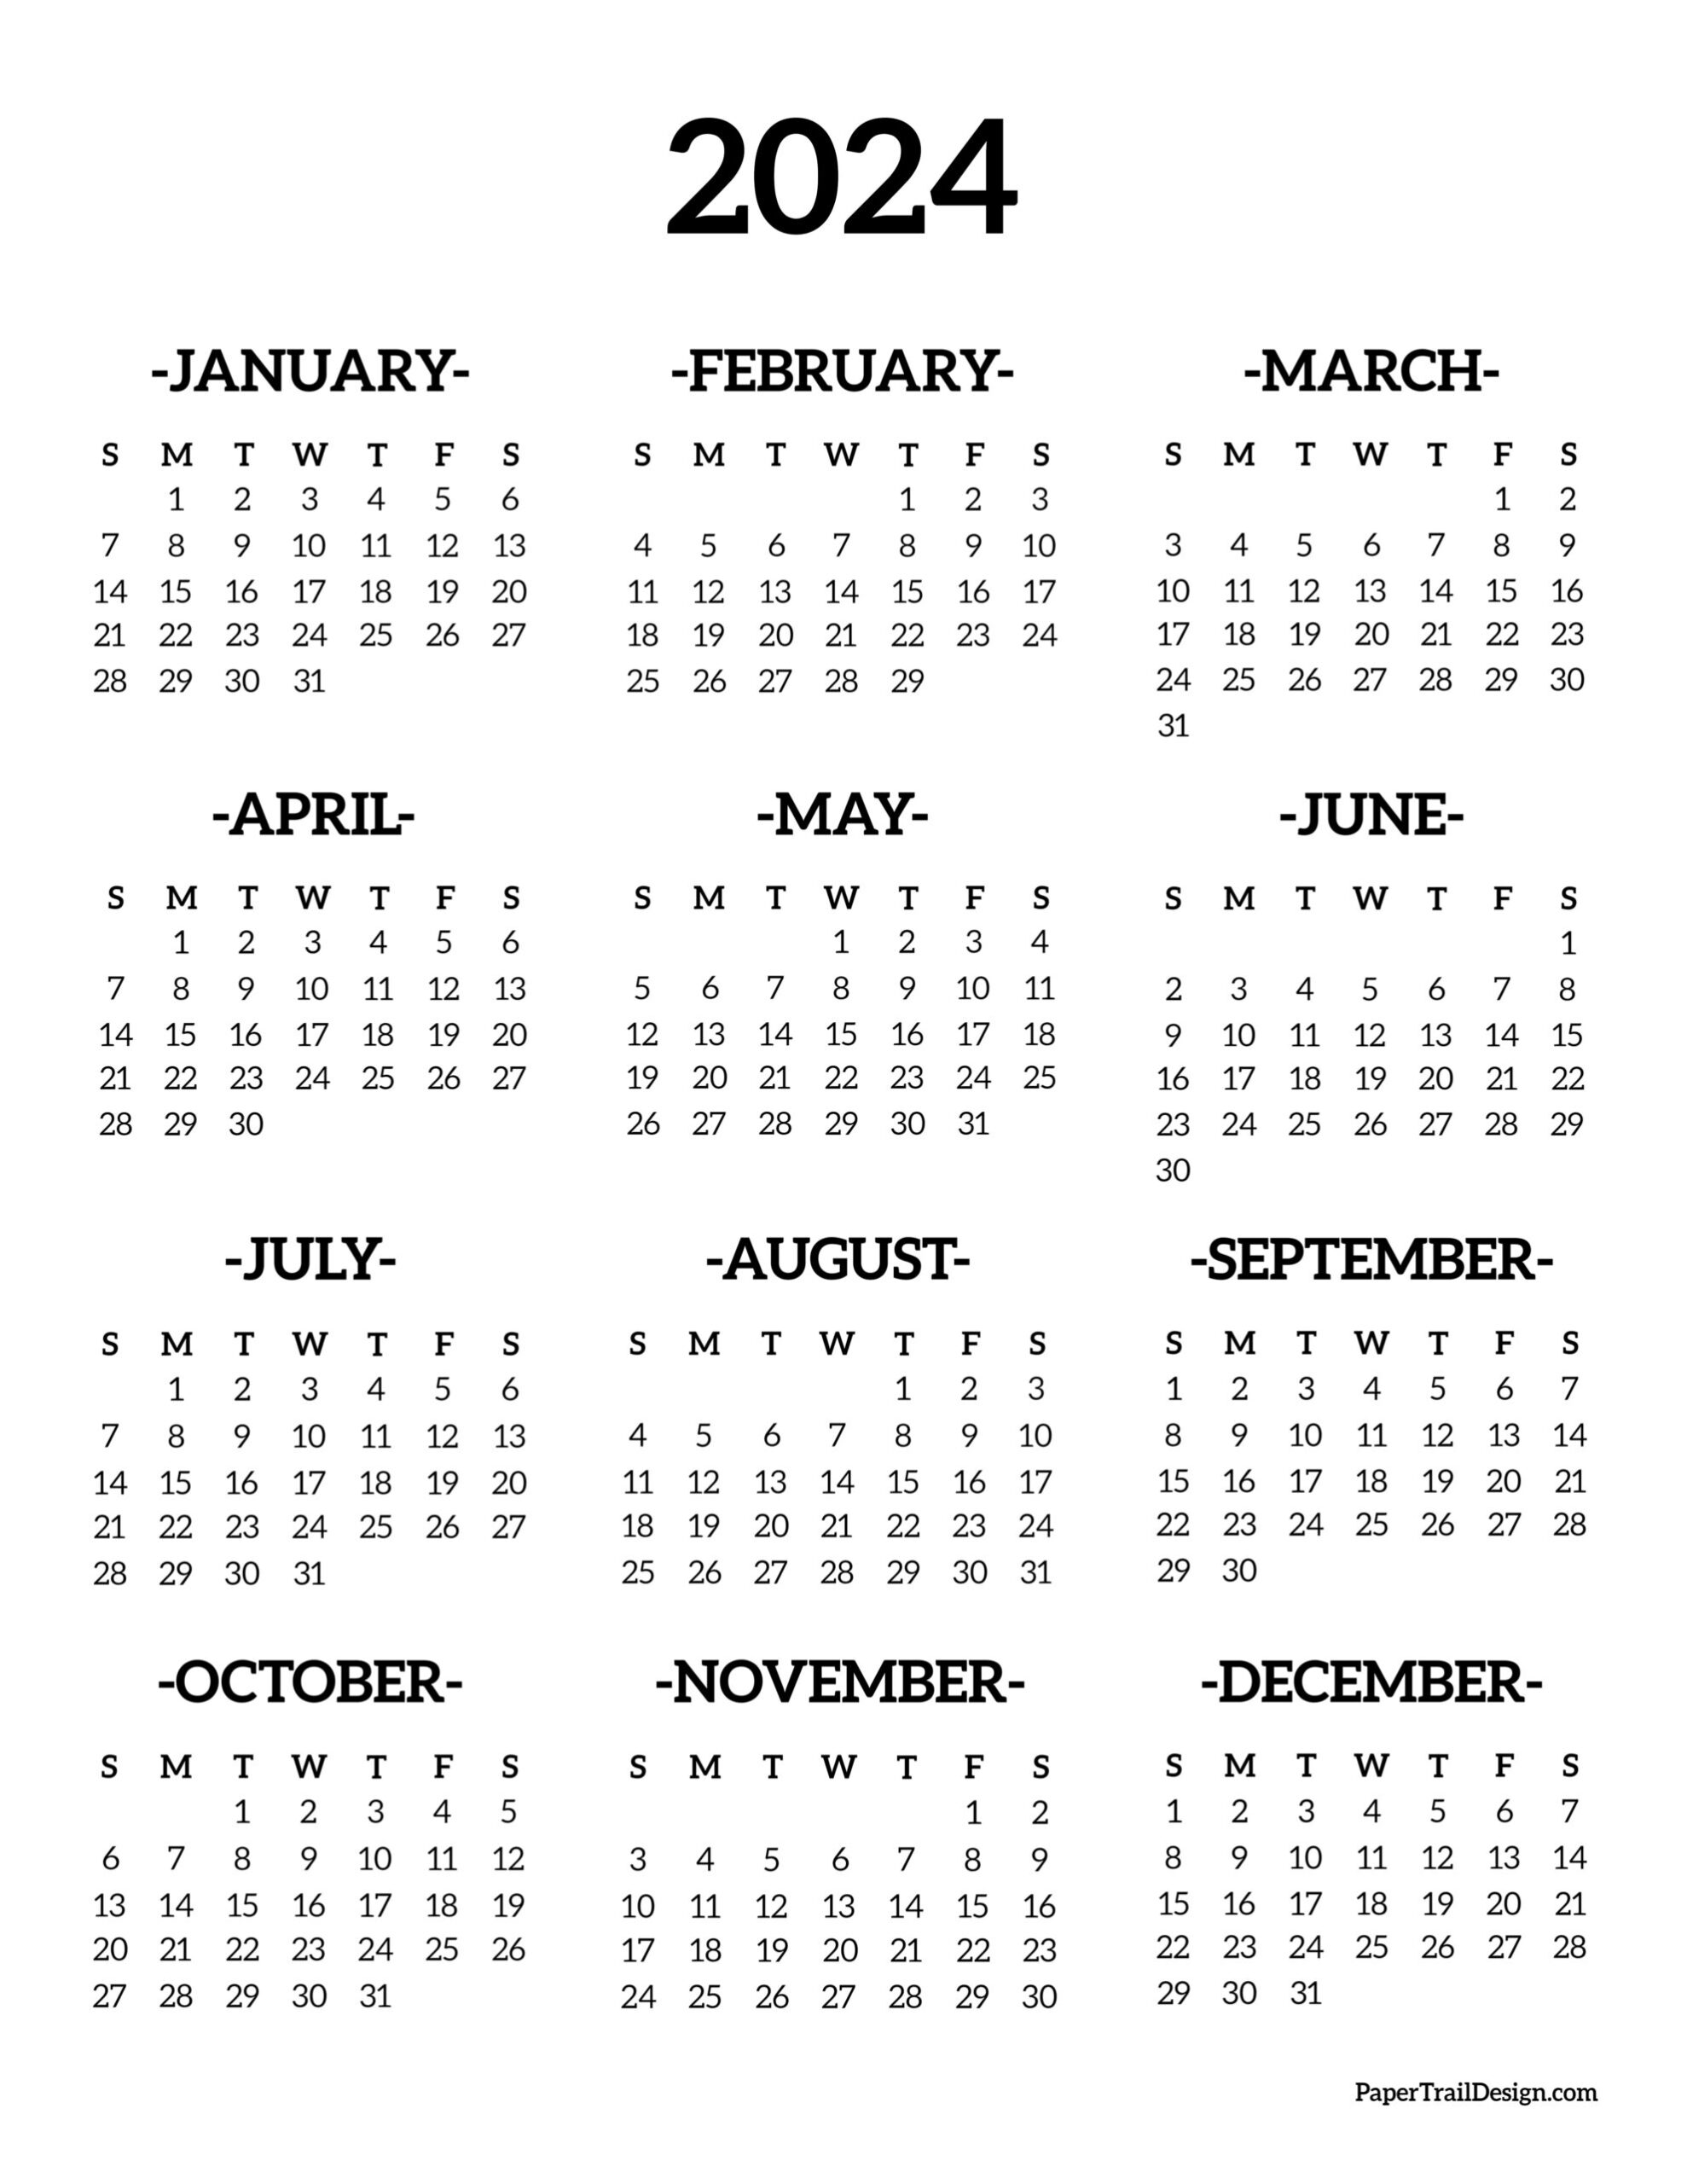 Calendar 2024 Printable One Page - Paper Trail Design for Free Printable Calendar 2024 And 2024